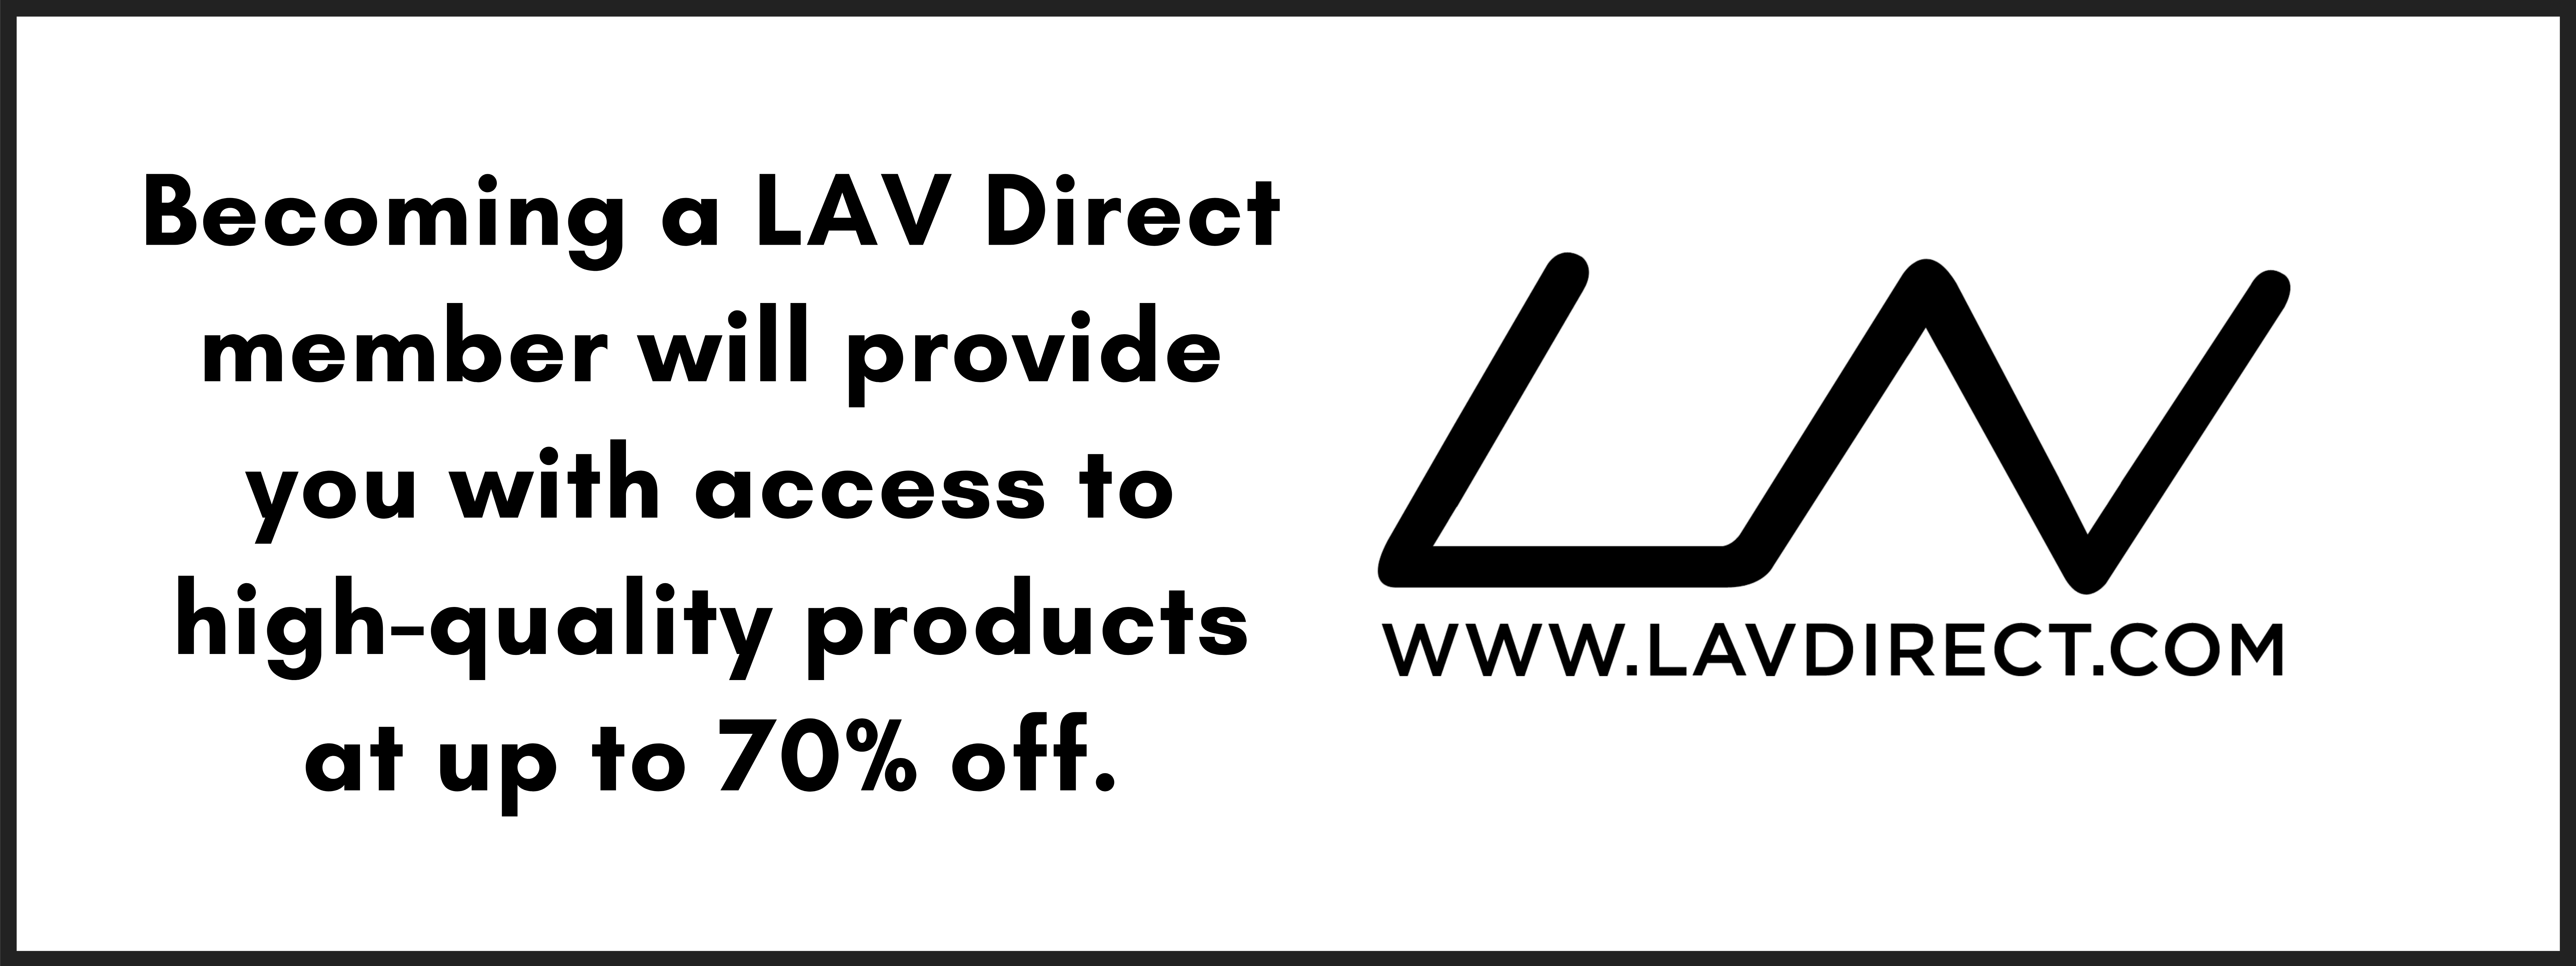 LAV Direct , Friday, November 27, 2020, Press release picture